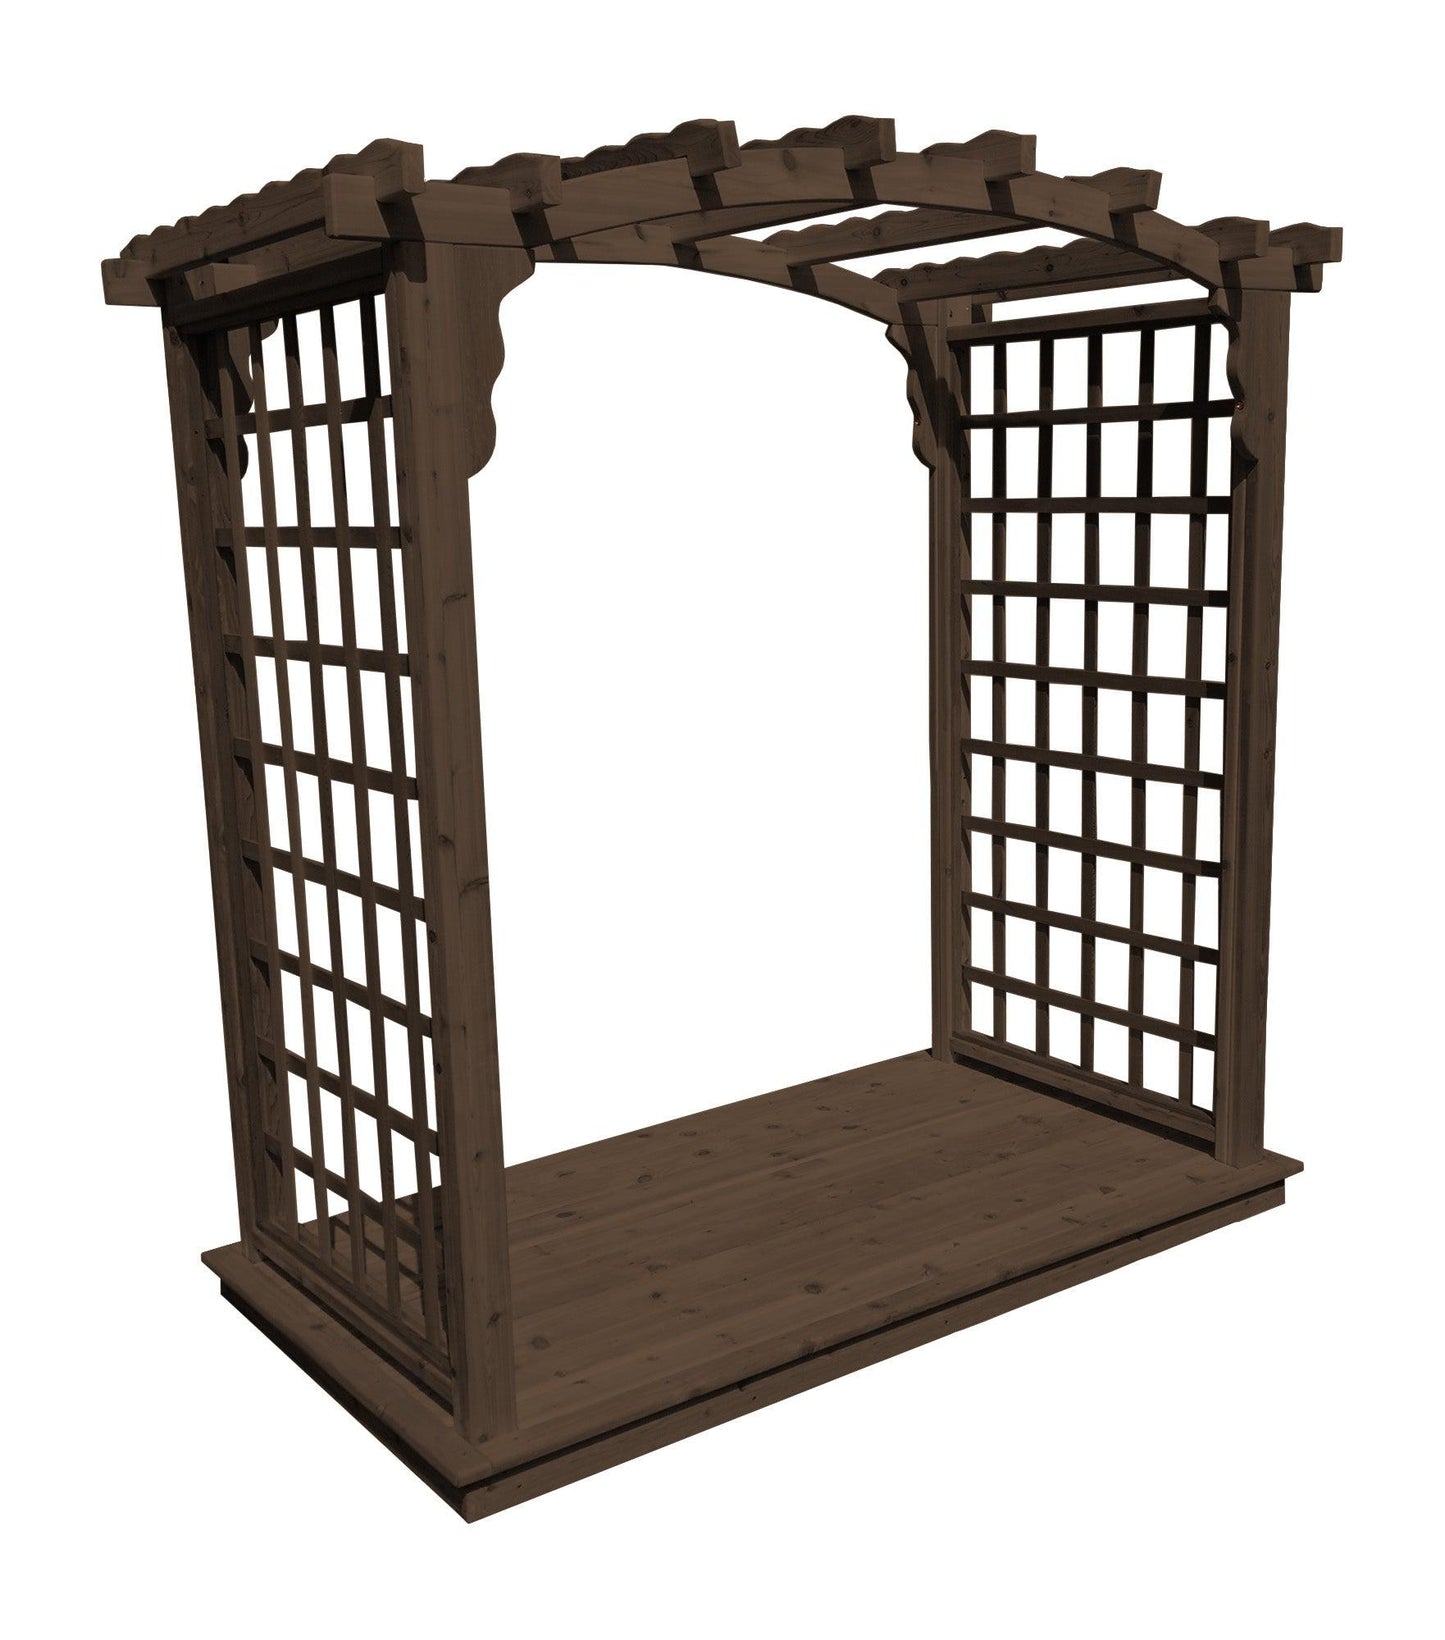 A&L Furniture Co. Western Red Cedar 6' Cambridge Arbor & Deck - LEAD TIME TO SHIP 4 WEEKS OR LESS